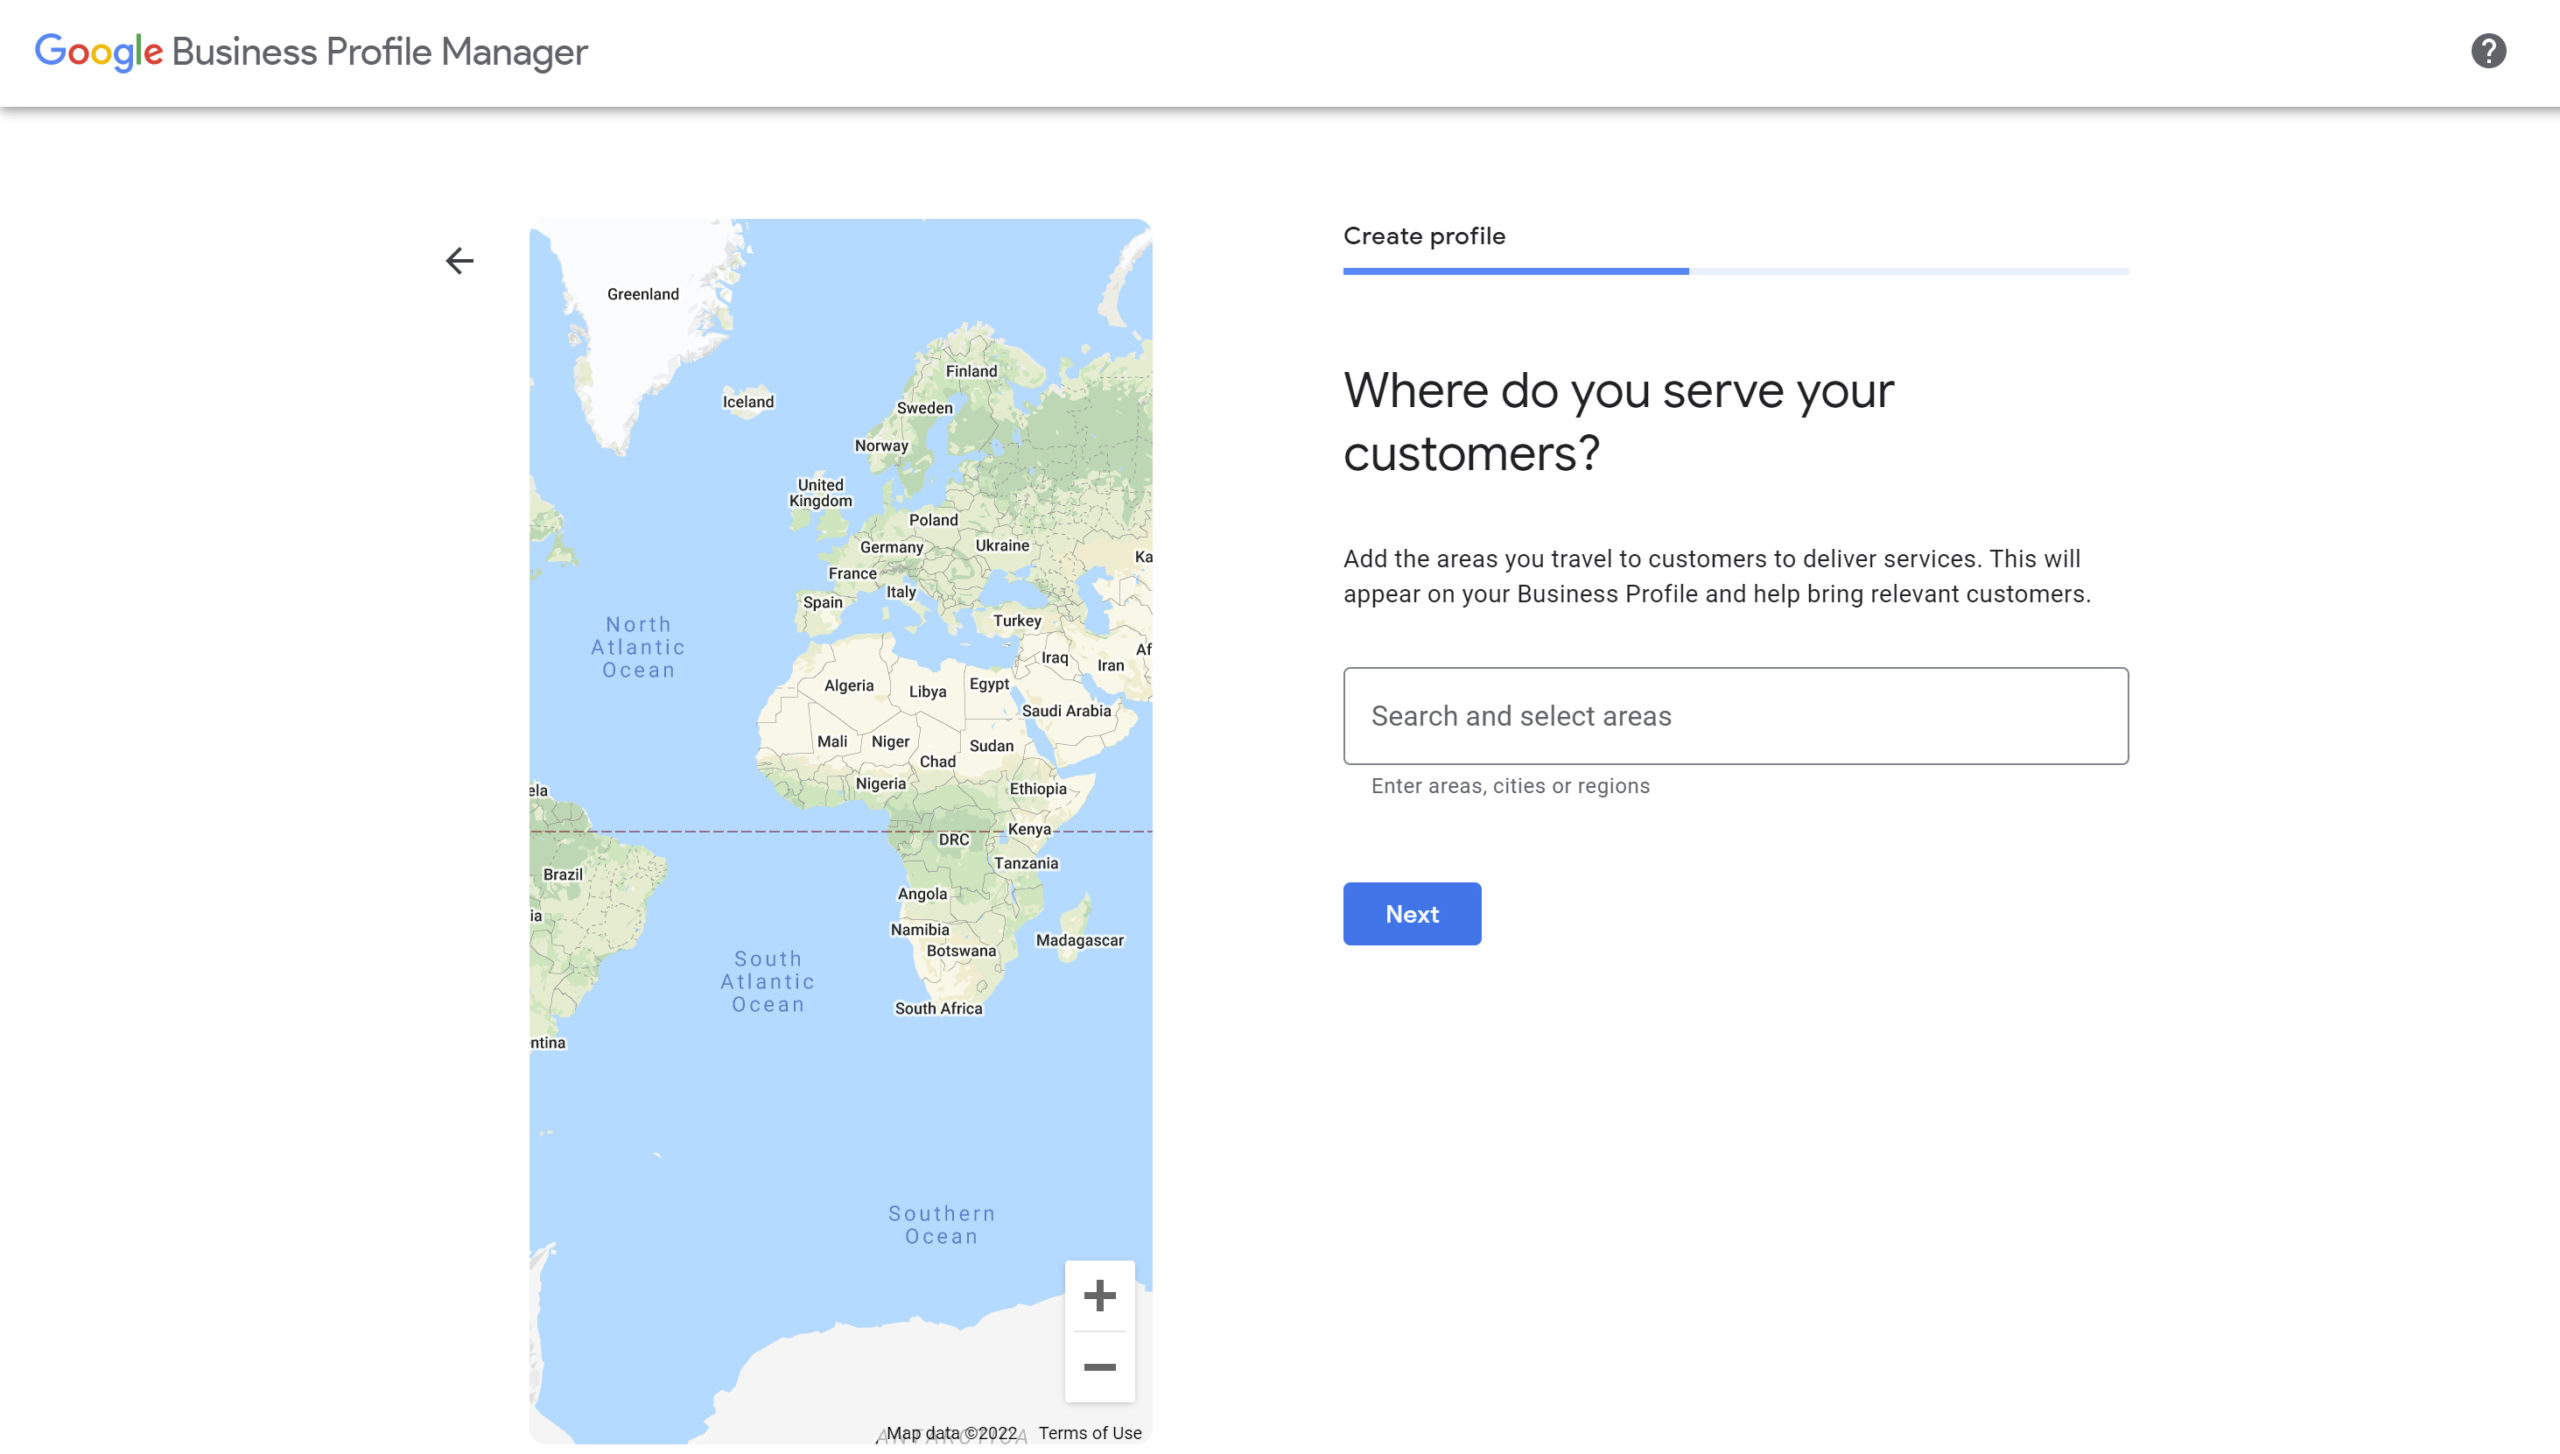 Find and add your preferred service area to your GBP profile